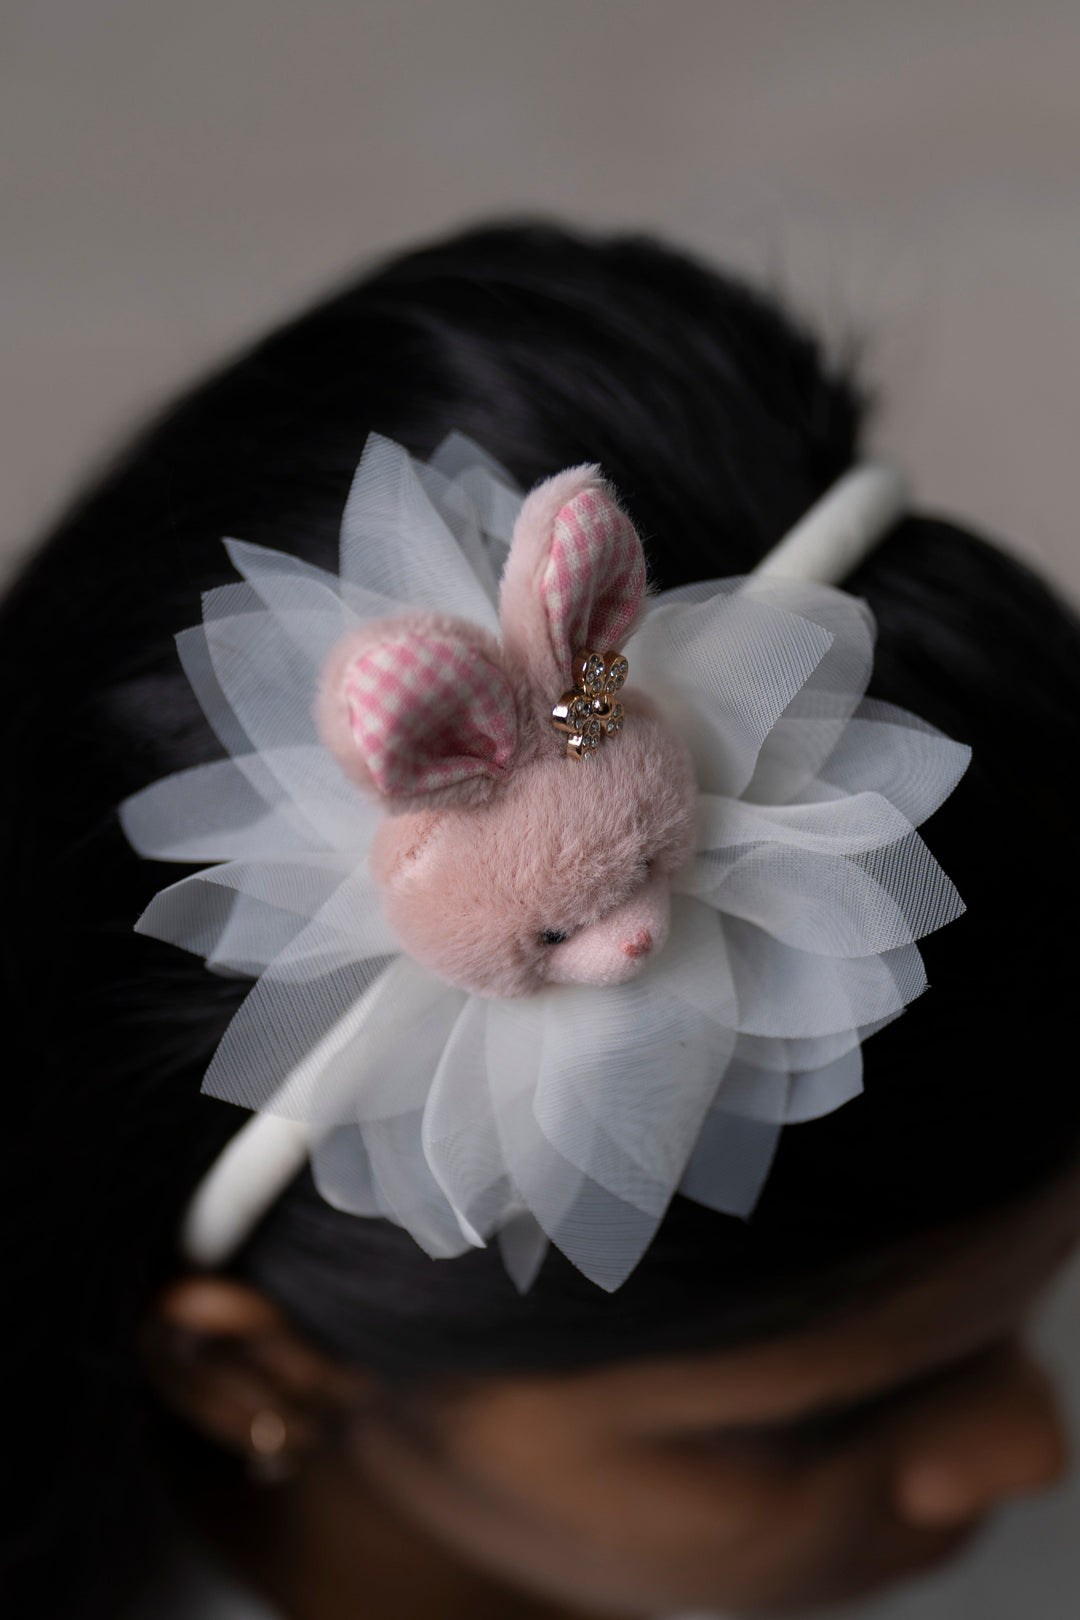 The Nesavu Hair Band Enchanted Plush Bunny Hairbow with White Tulle and Sparkling Accents Nesavu White JHB80C Plush Bunny Hair Accessory with Tulle | Magical Hairbow for Children | The Nesavu